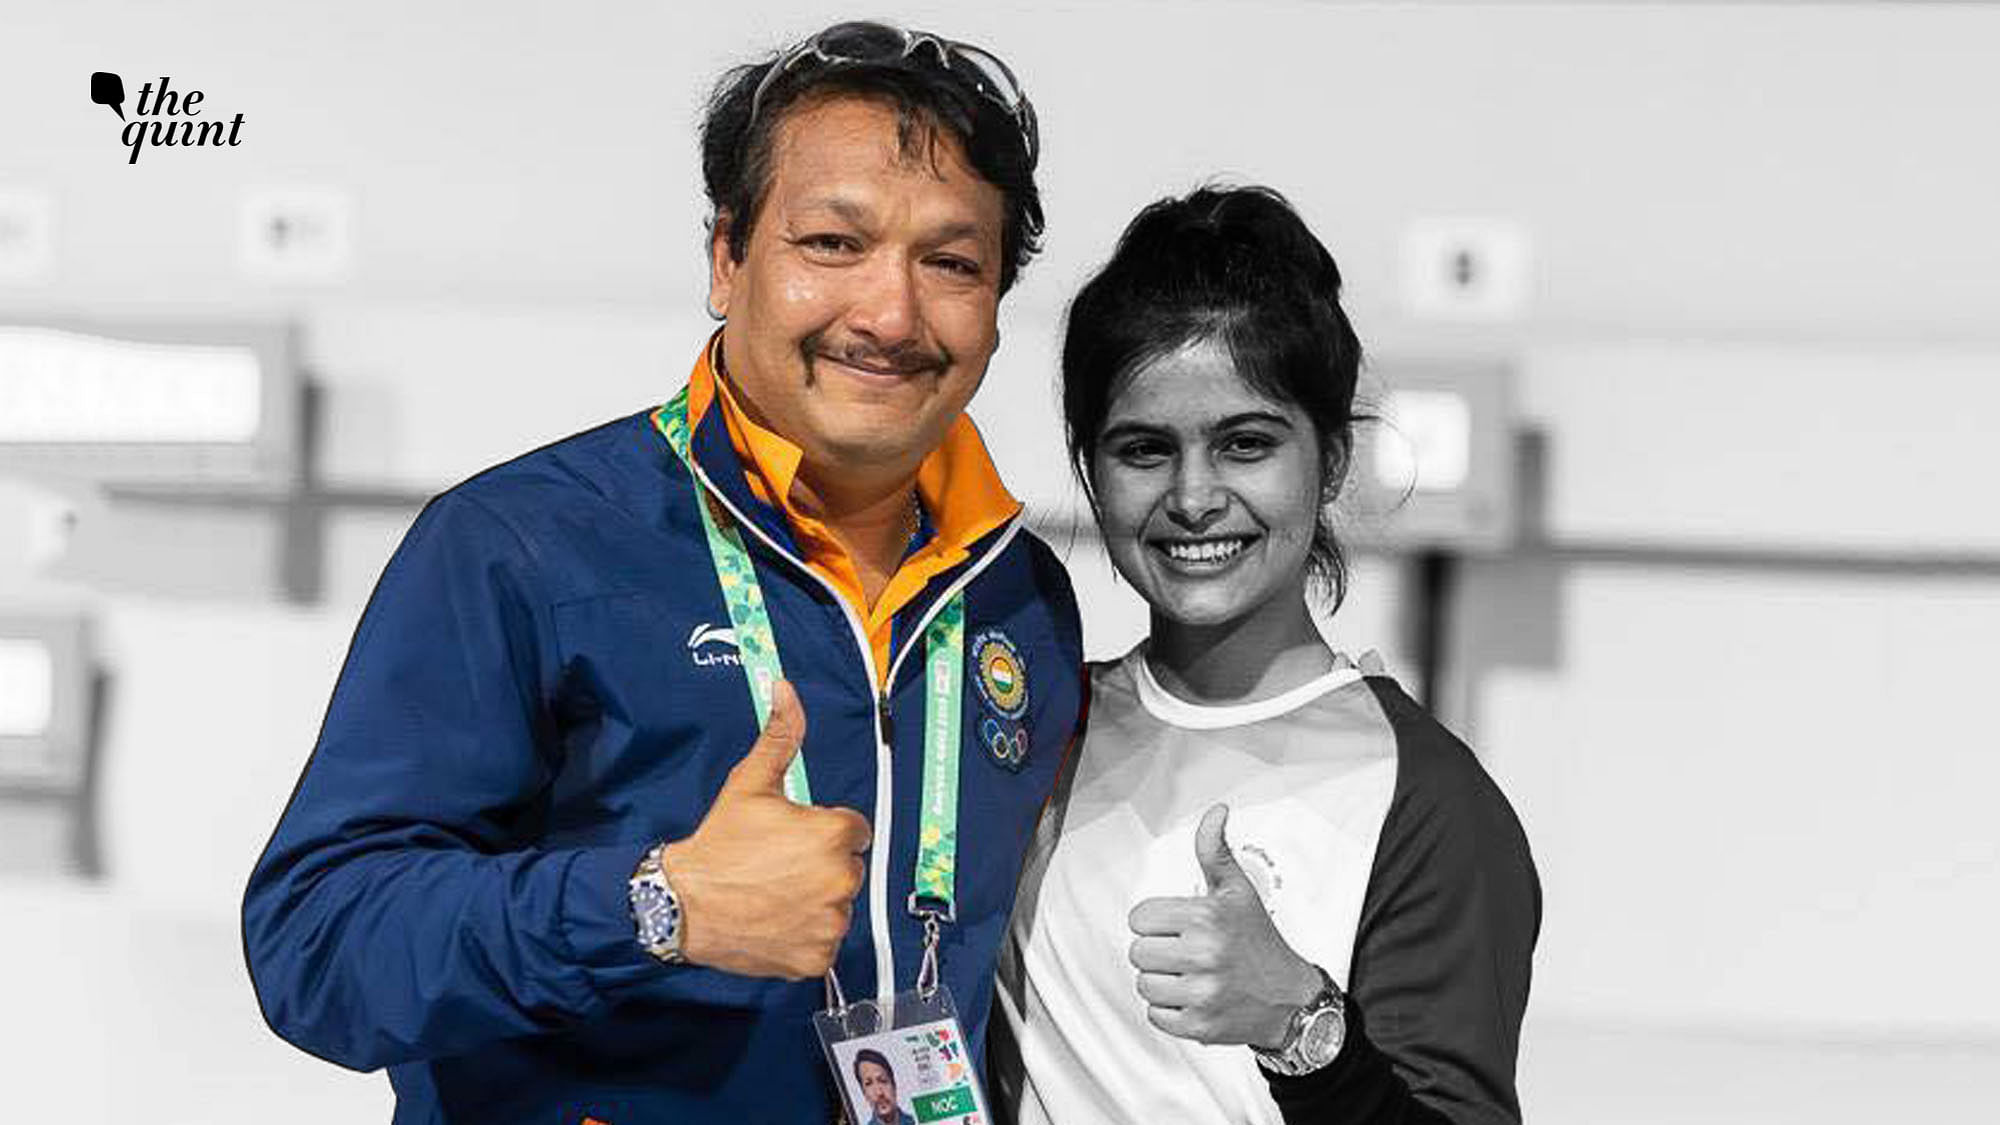 Dronacharya Award 2019: The dust just refuses to settle down on National Sports Awards committee’s decision to overlook pistol coach Jaspal Rana for the Dronacharya Award this year.